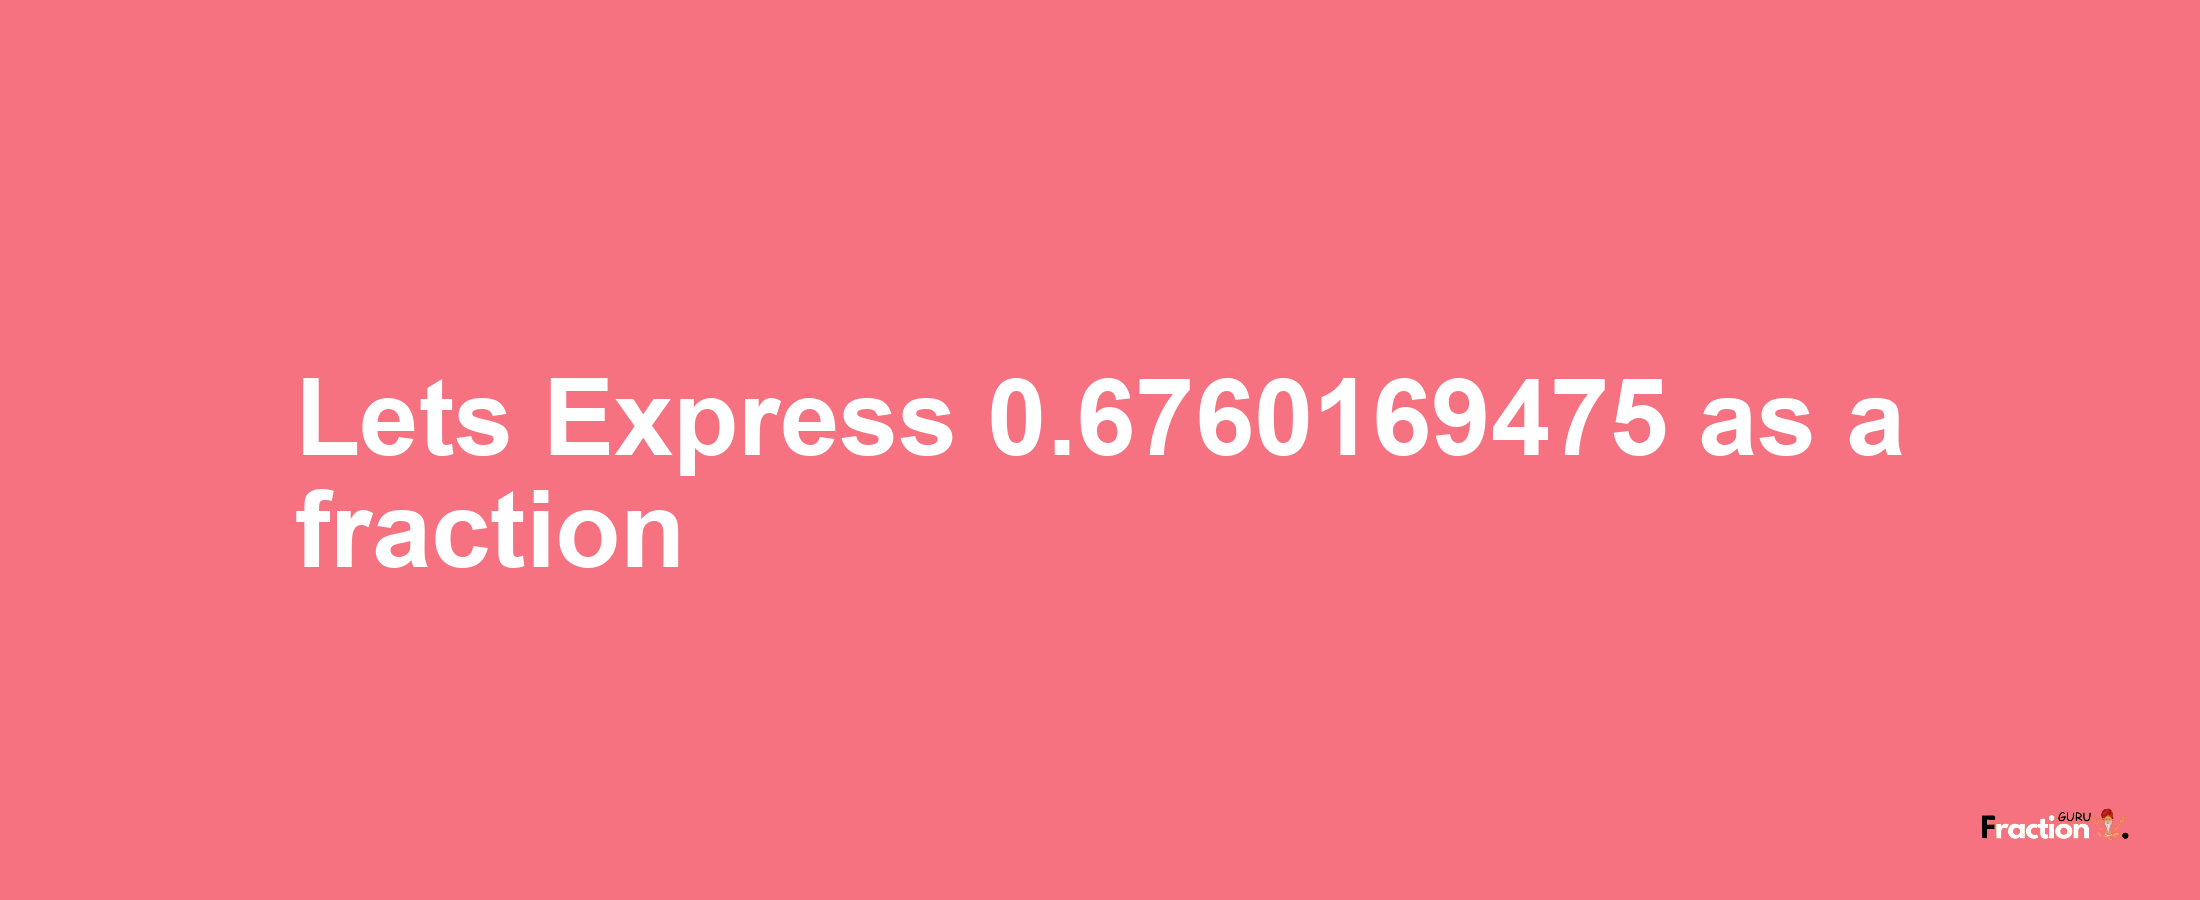 Lets Express 0.6760169475 as afraction